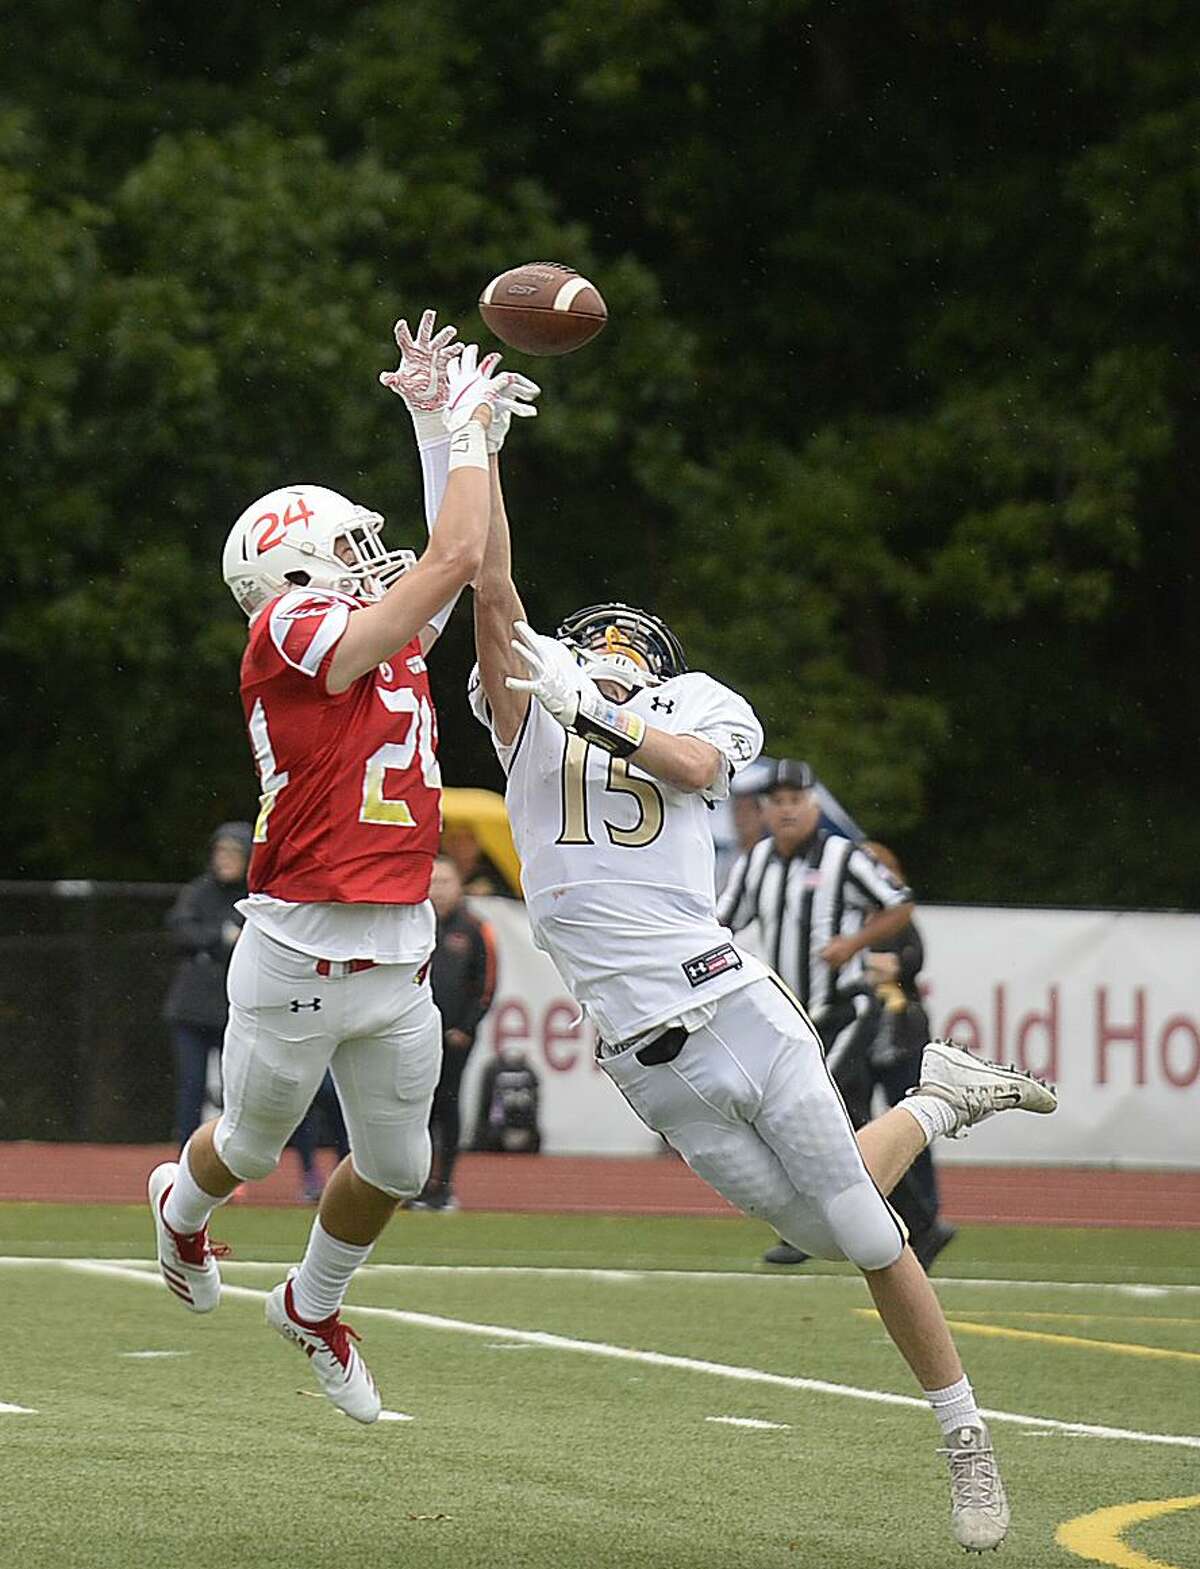 Greenwich’s Nick Veronis blocks a pass intended for Trumbull’s Kyle Atherton during a Sept. 8 game at Cardinal Stadium in Greenwich.